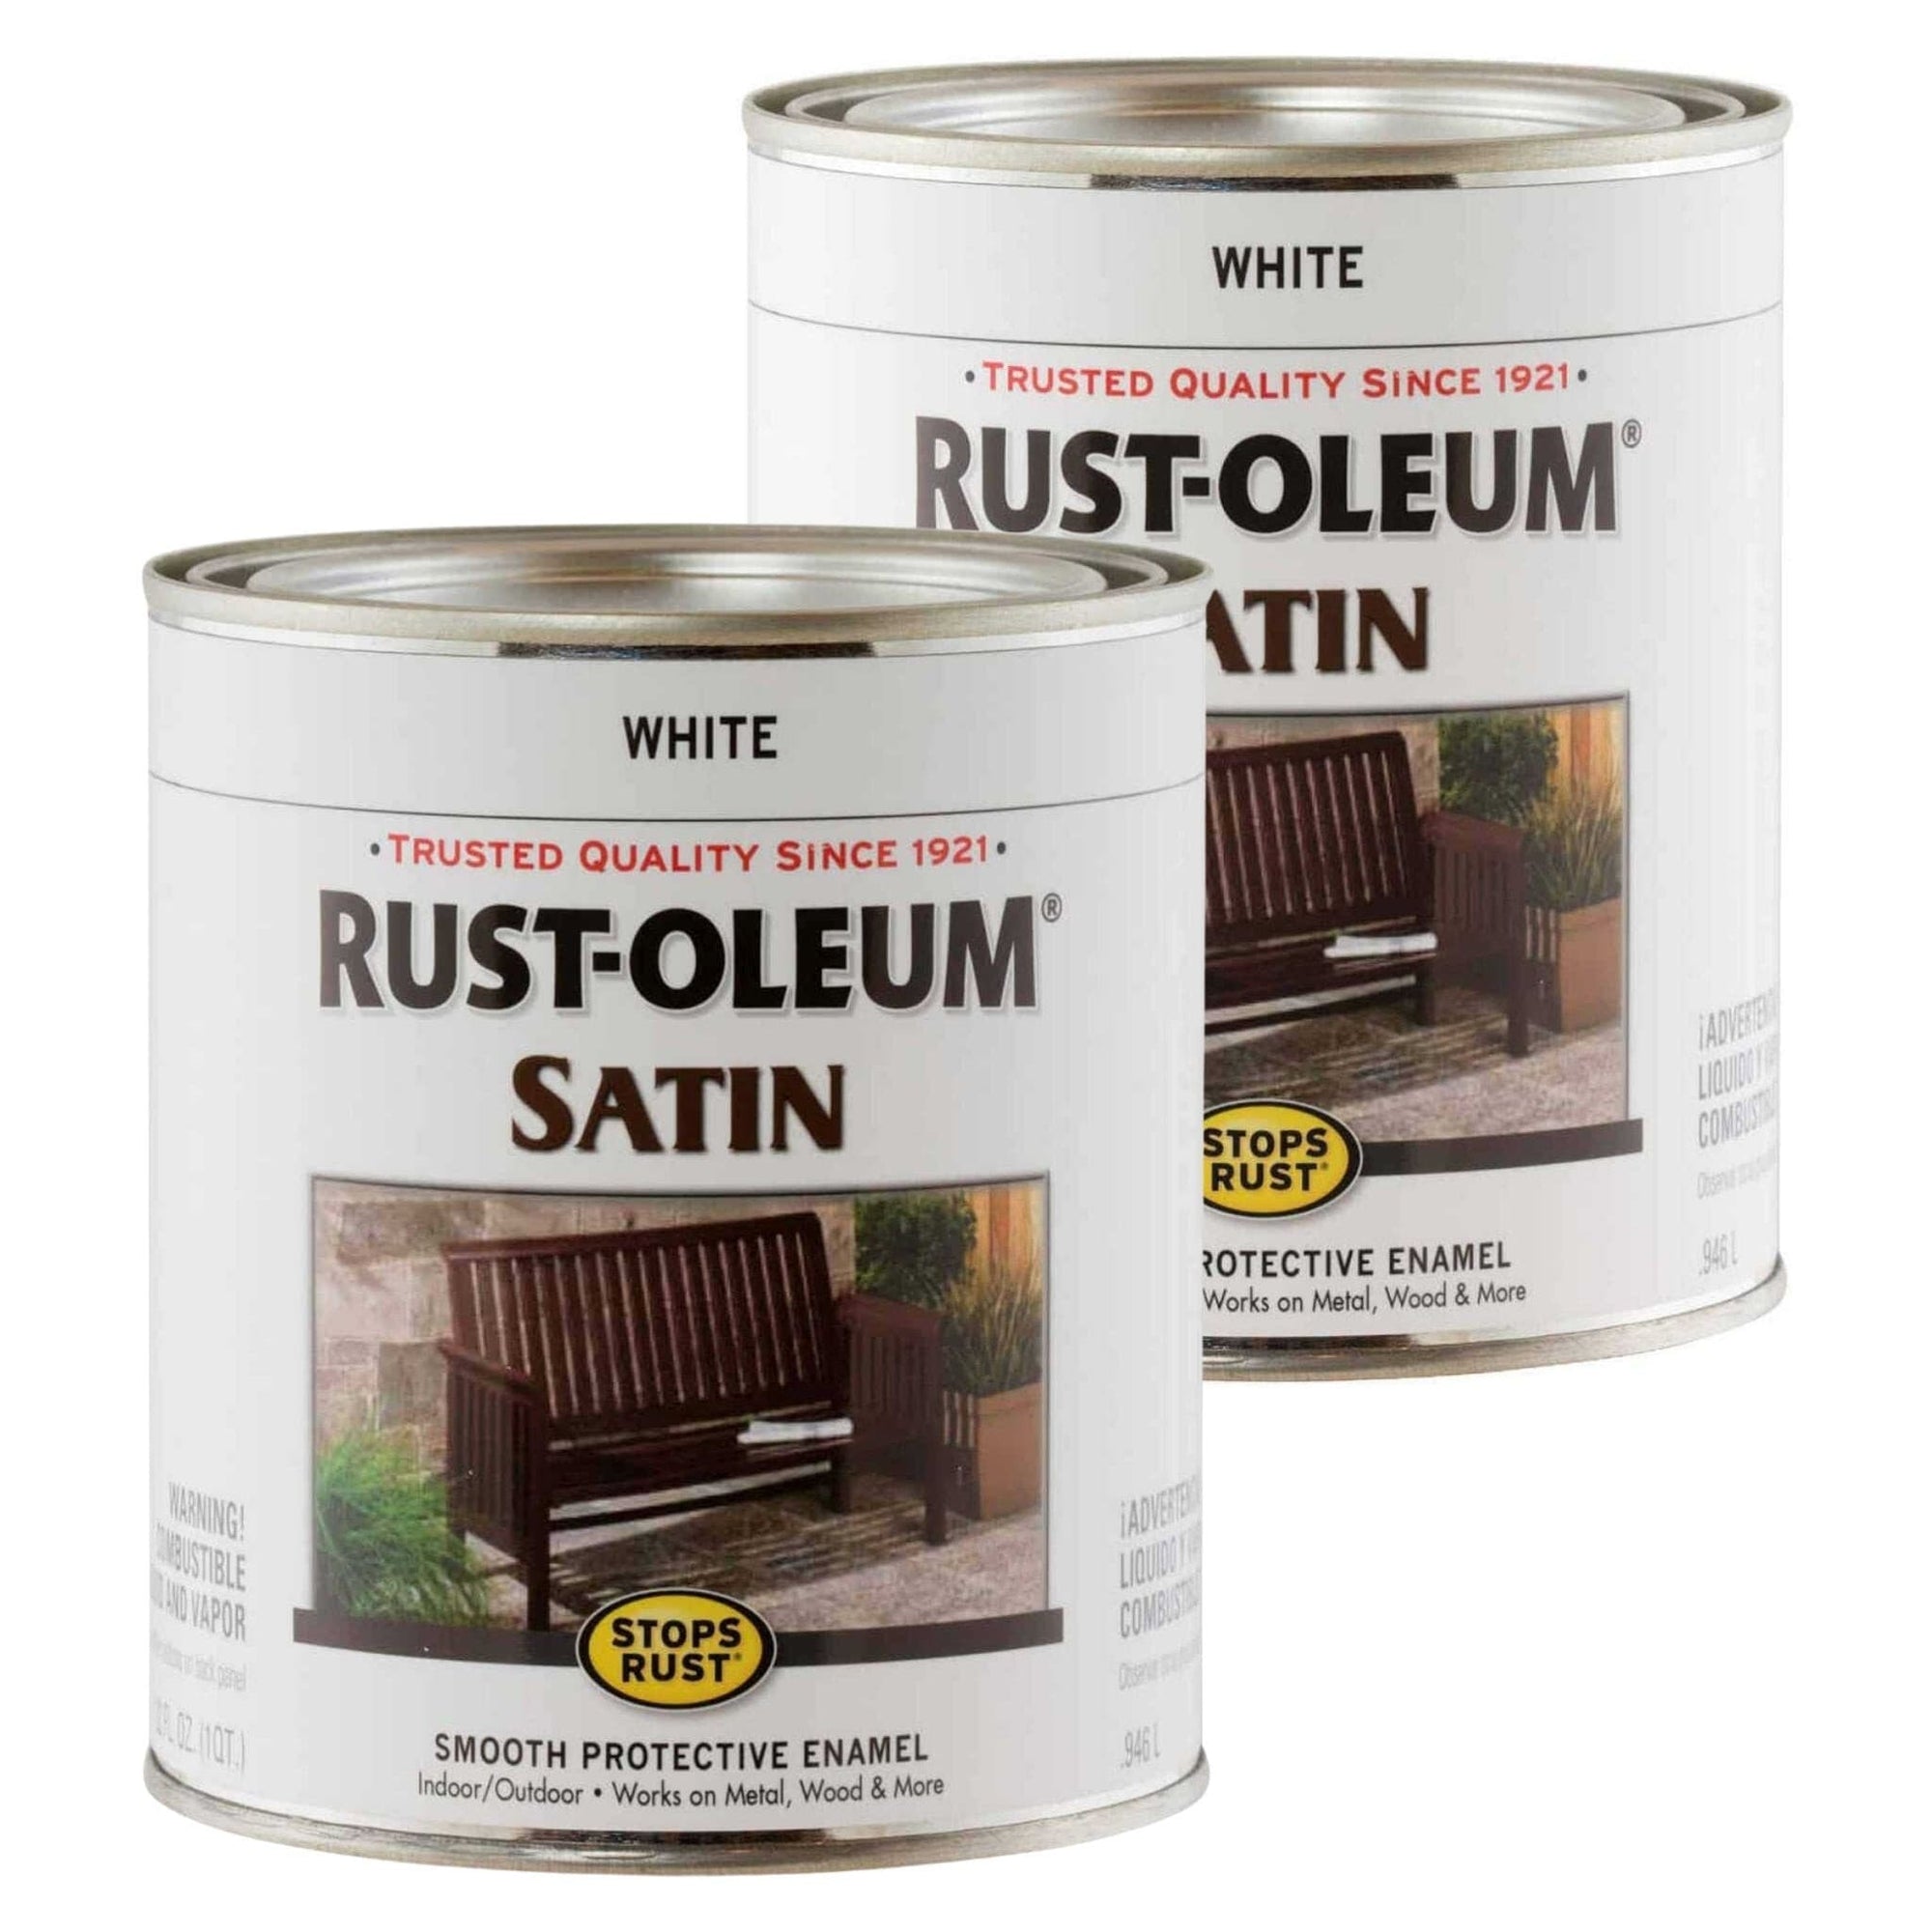 Rust-Oleum Stops Rust Oil Based Satin Protective Rust Control Enamel - Satin White (2 Pack) - South East Clearance Centre